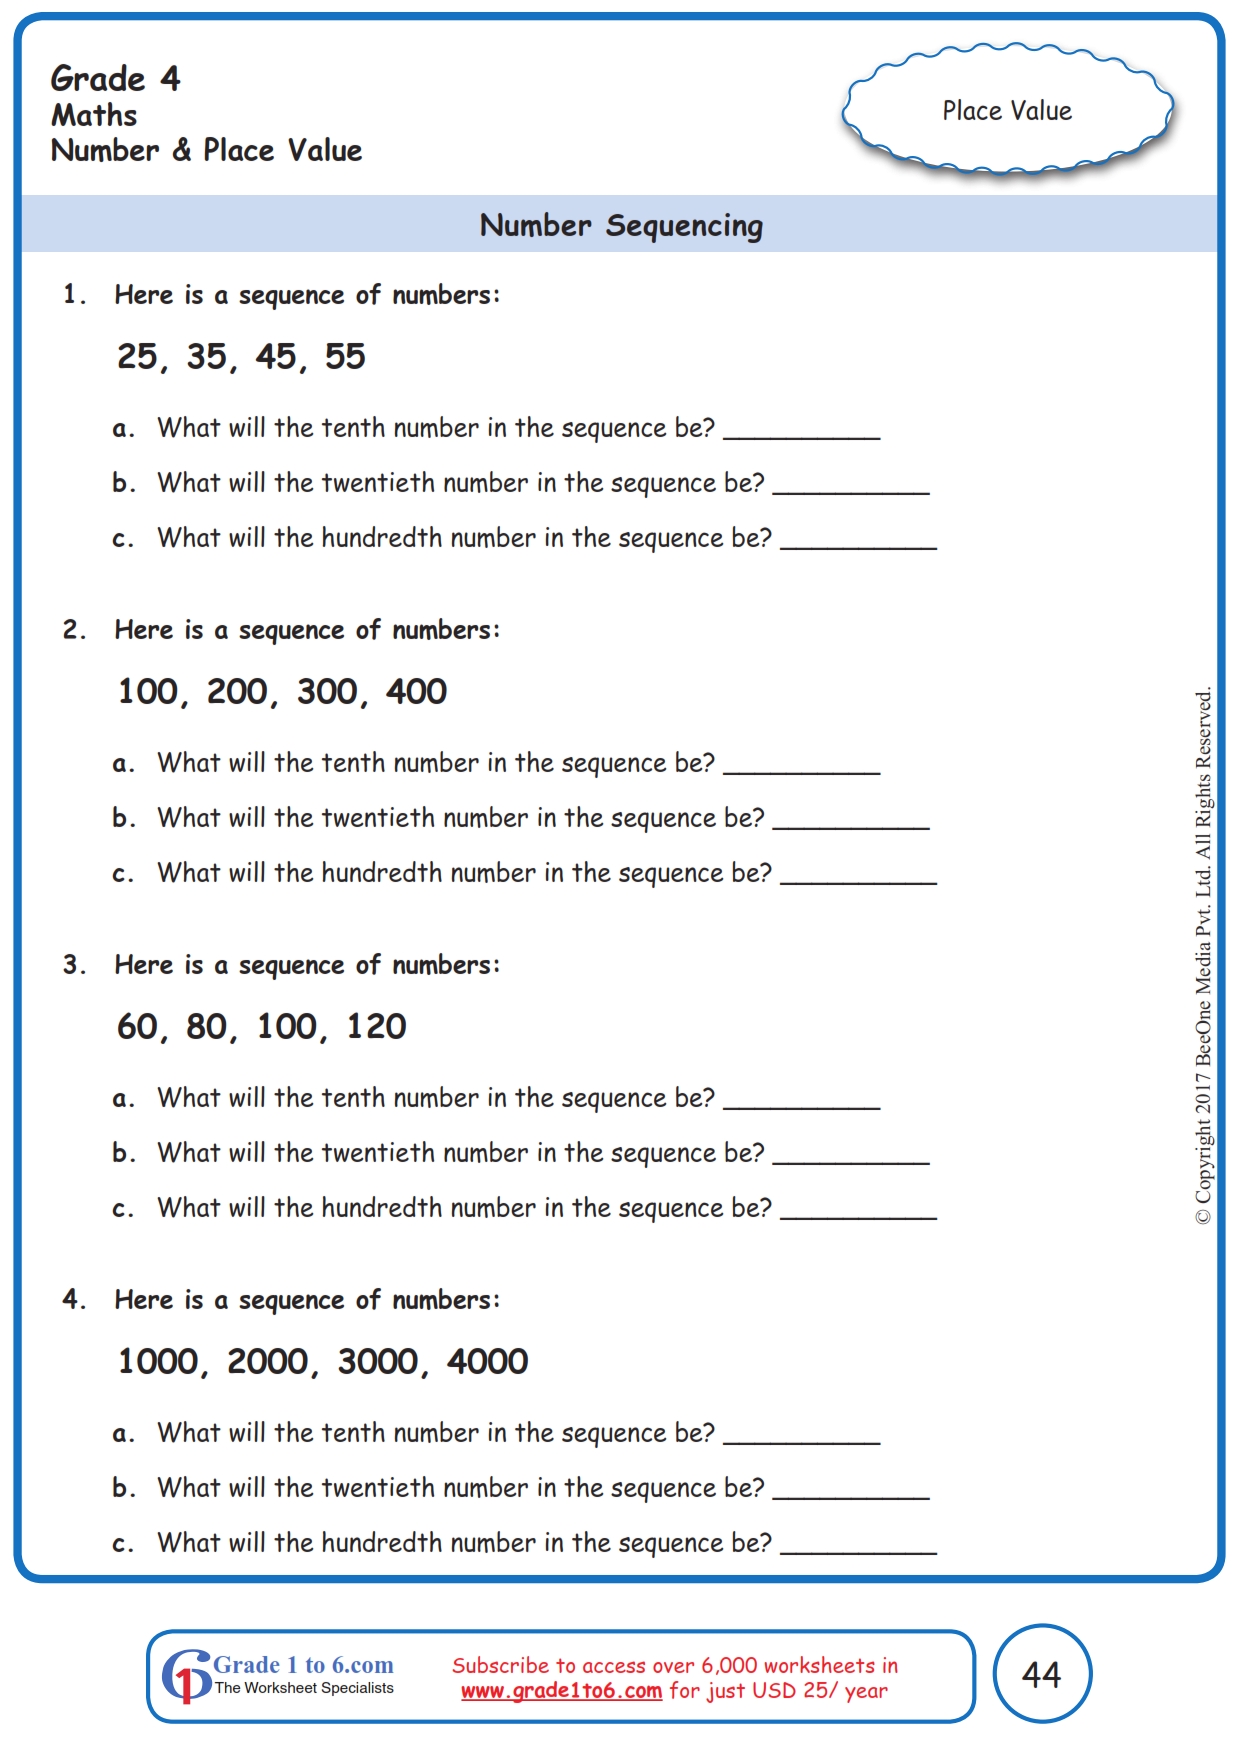 grade-4-number-sequences-worksheets-www-grade1to6